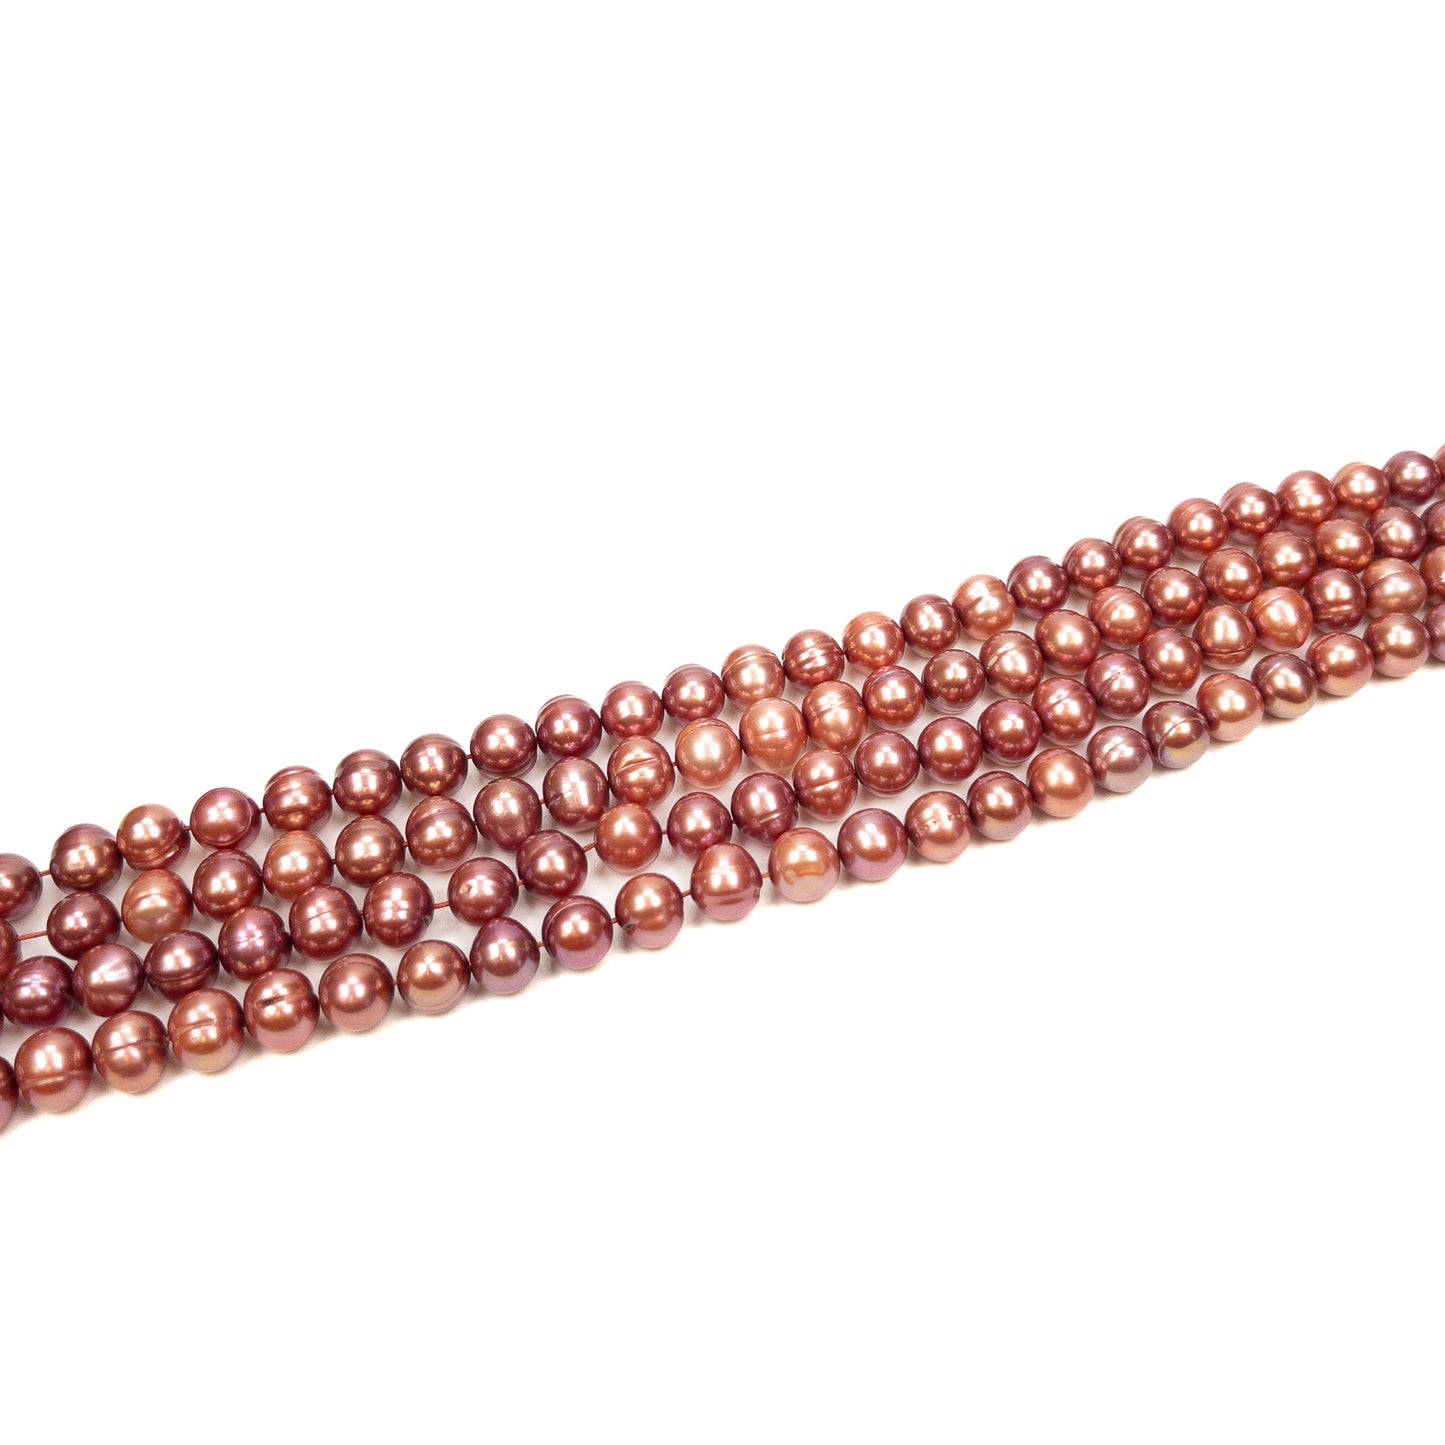 Berry Gold 9mm Potato Freshwater Pearl (Available in 2 Quantities)